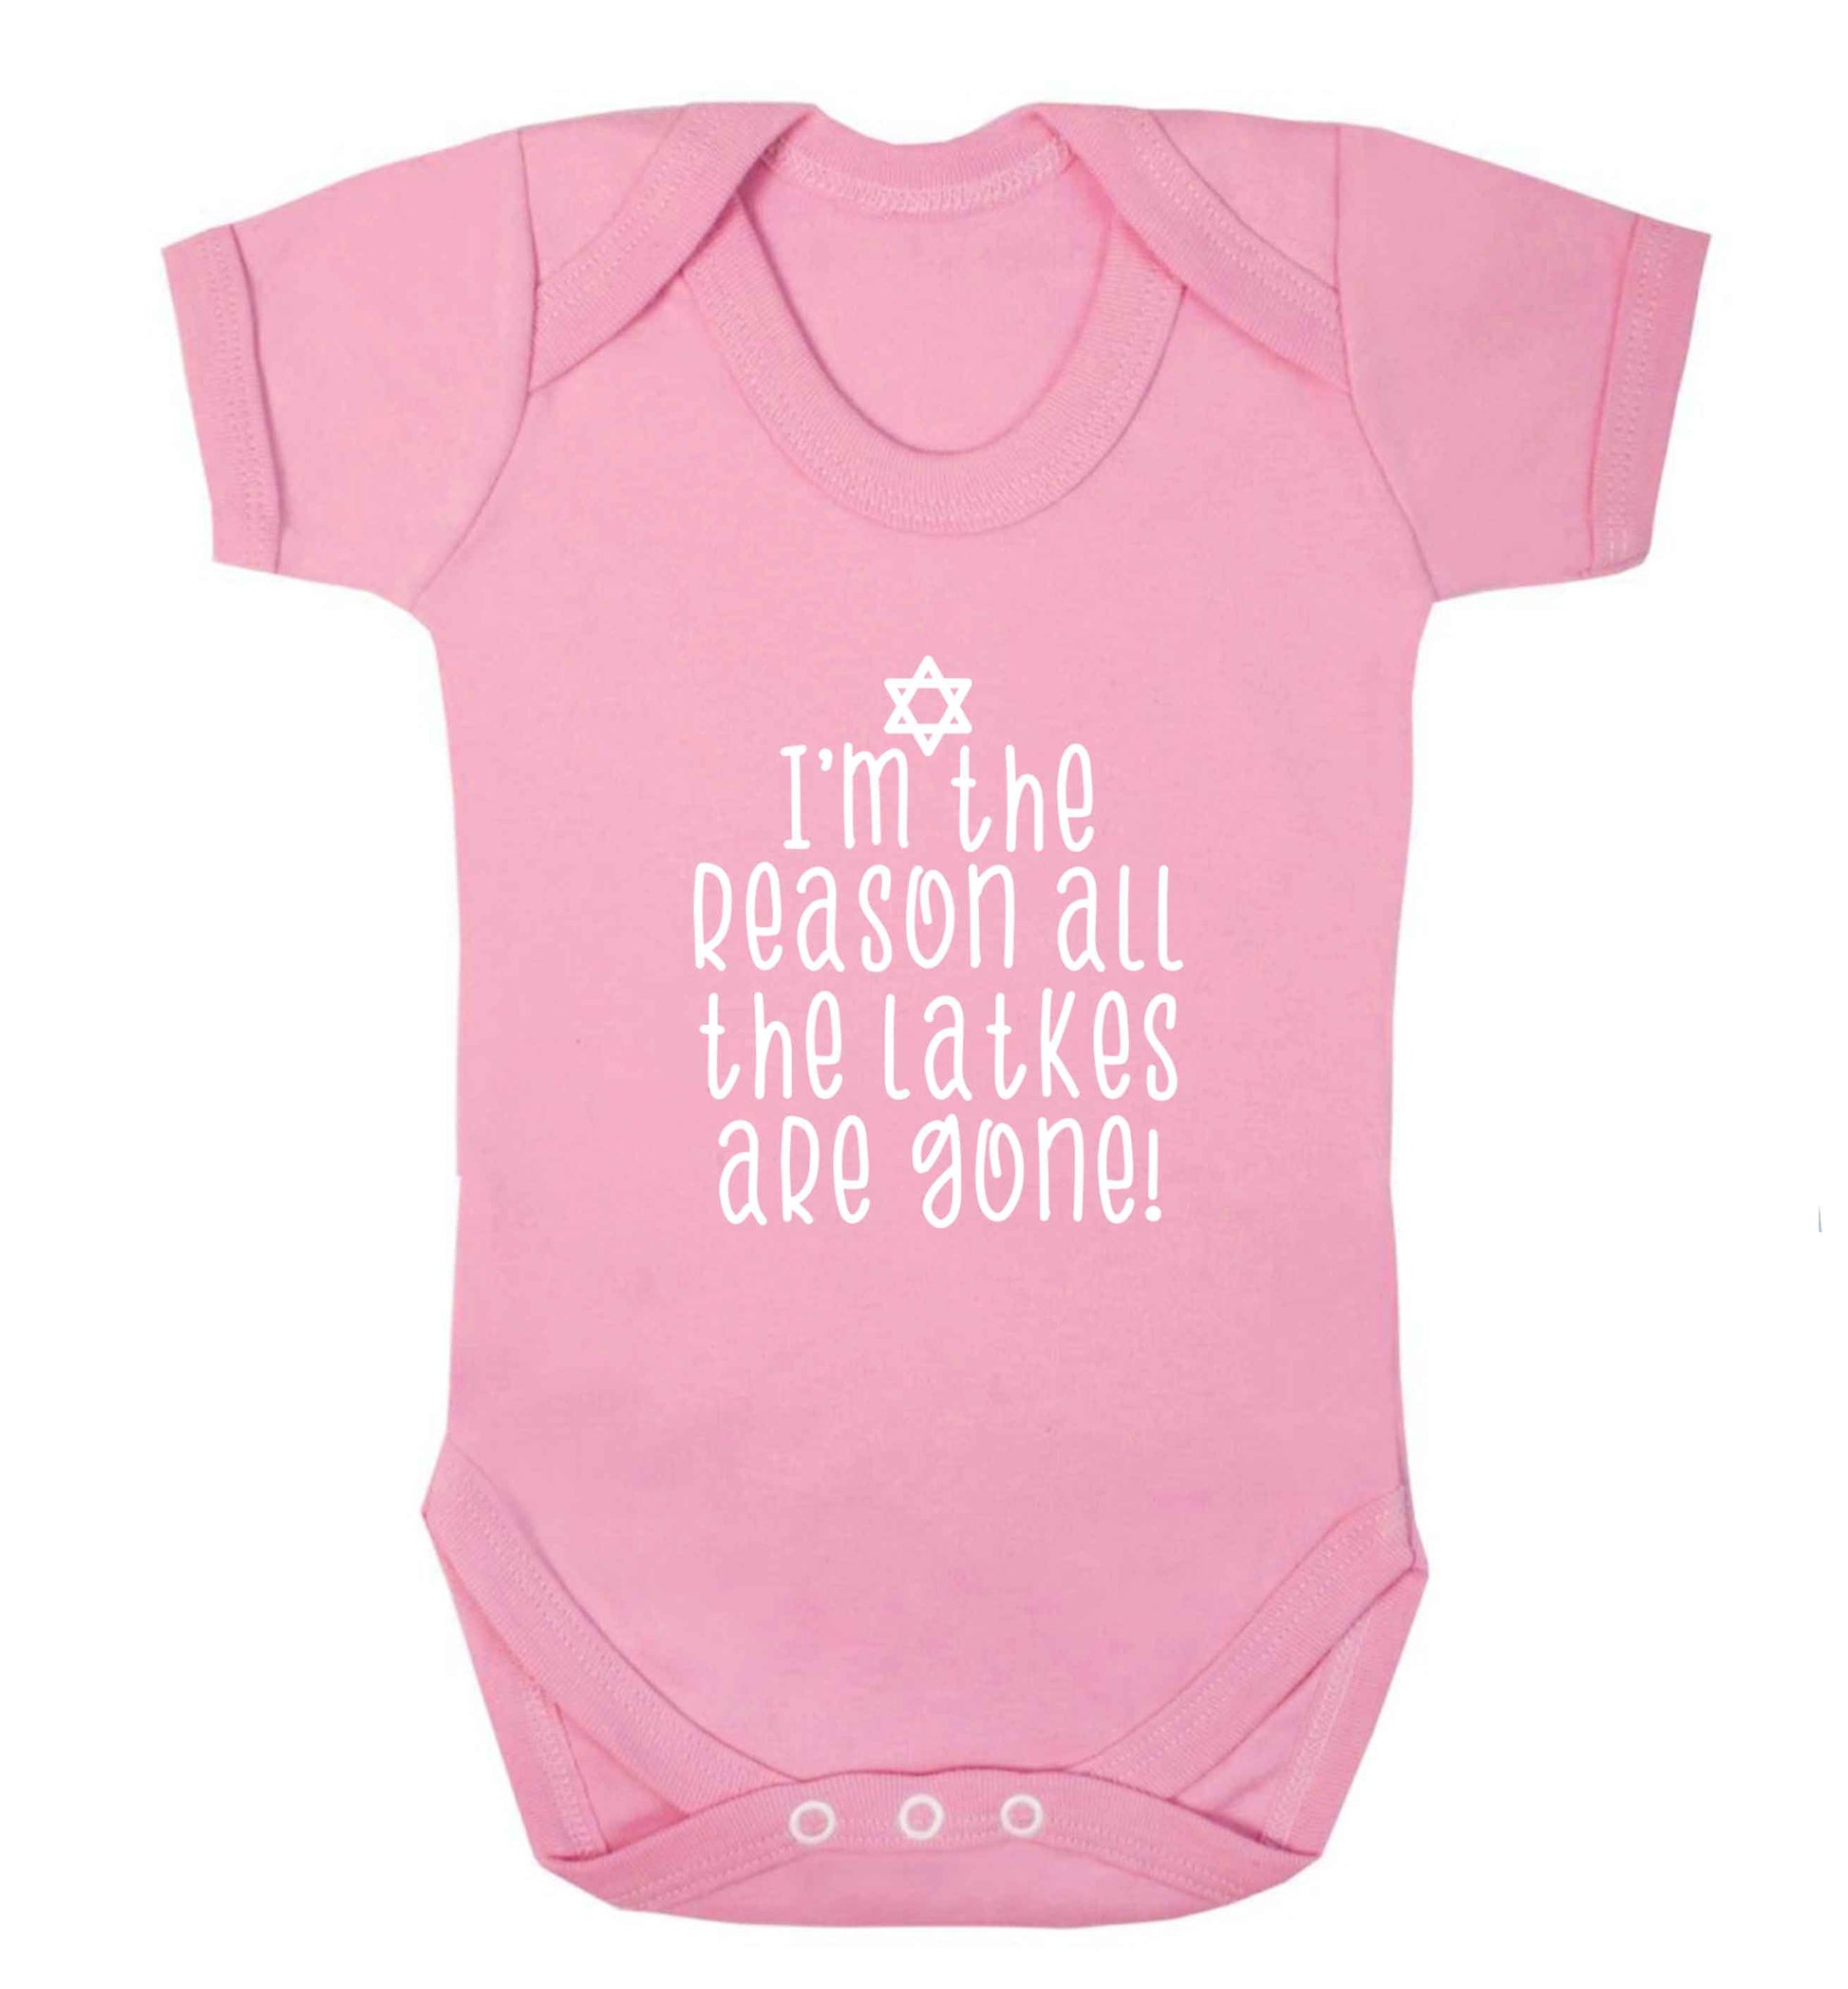 I'm the reason all the latkes are gone baby vest pale pink 18-24 months